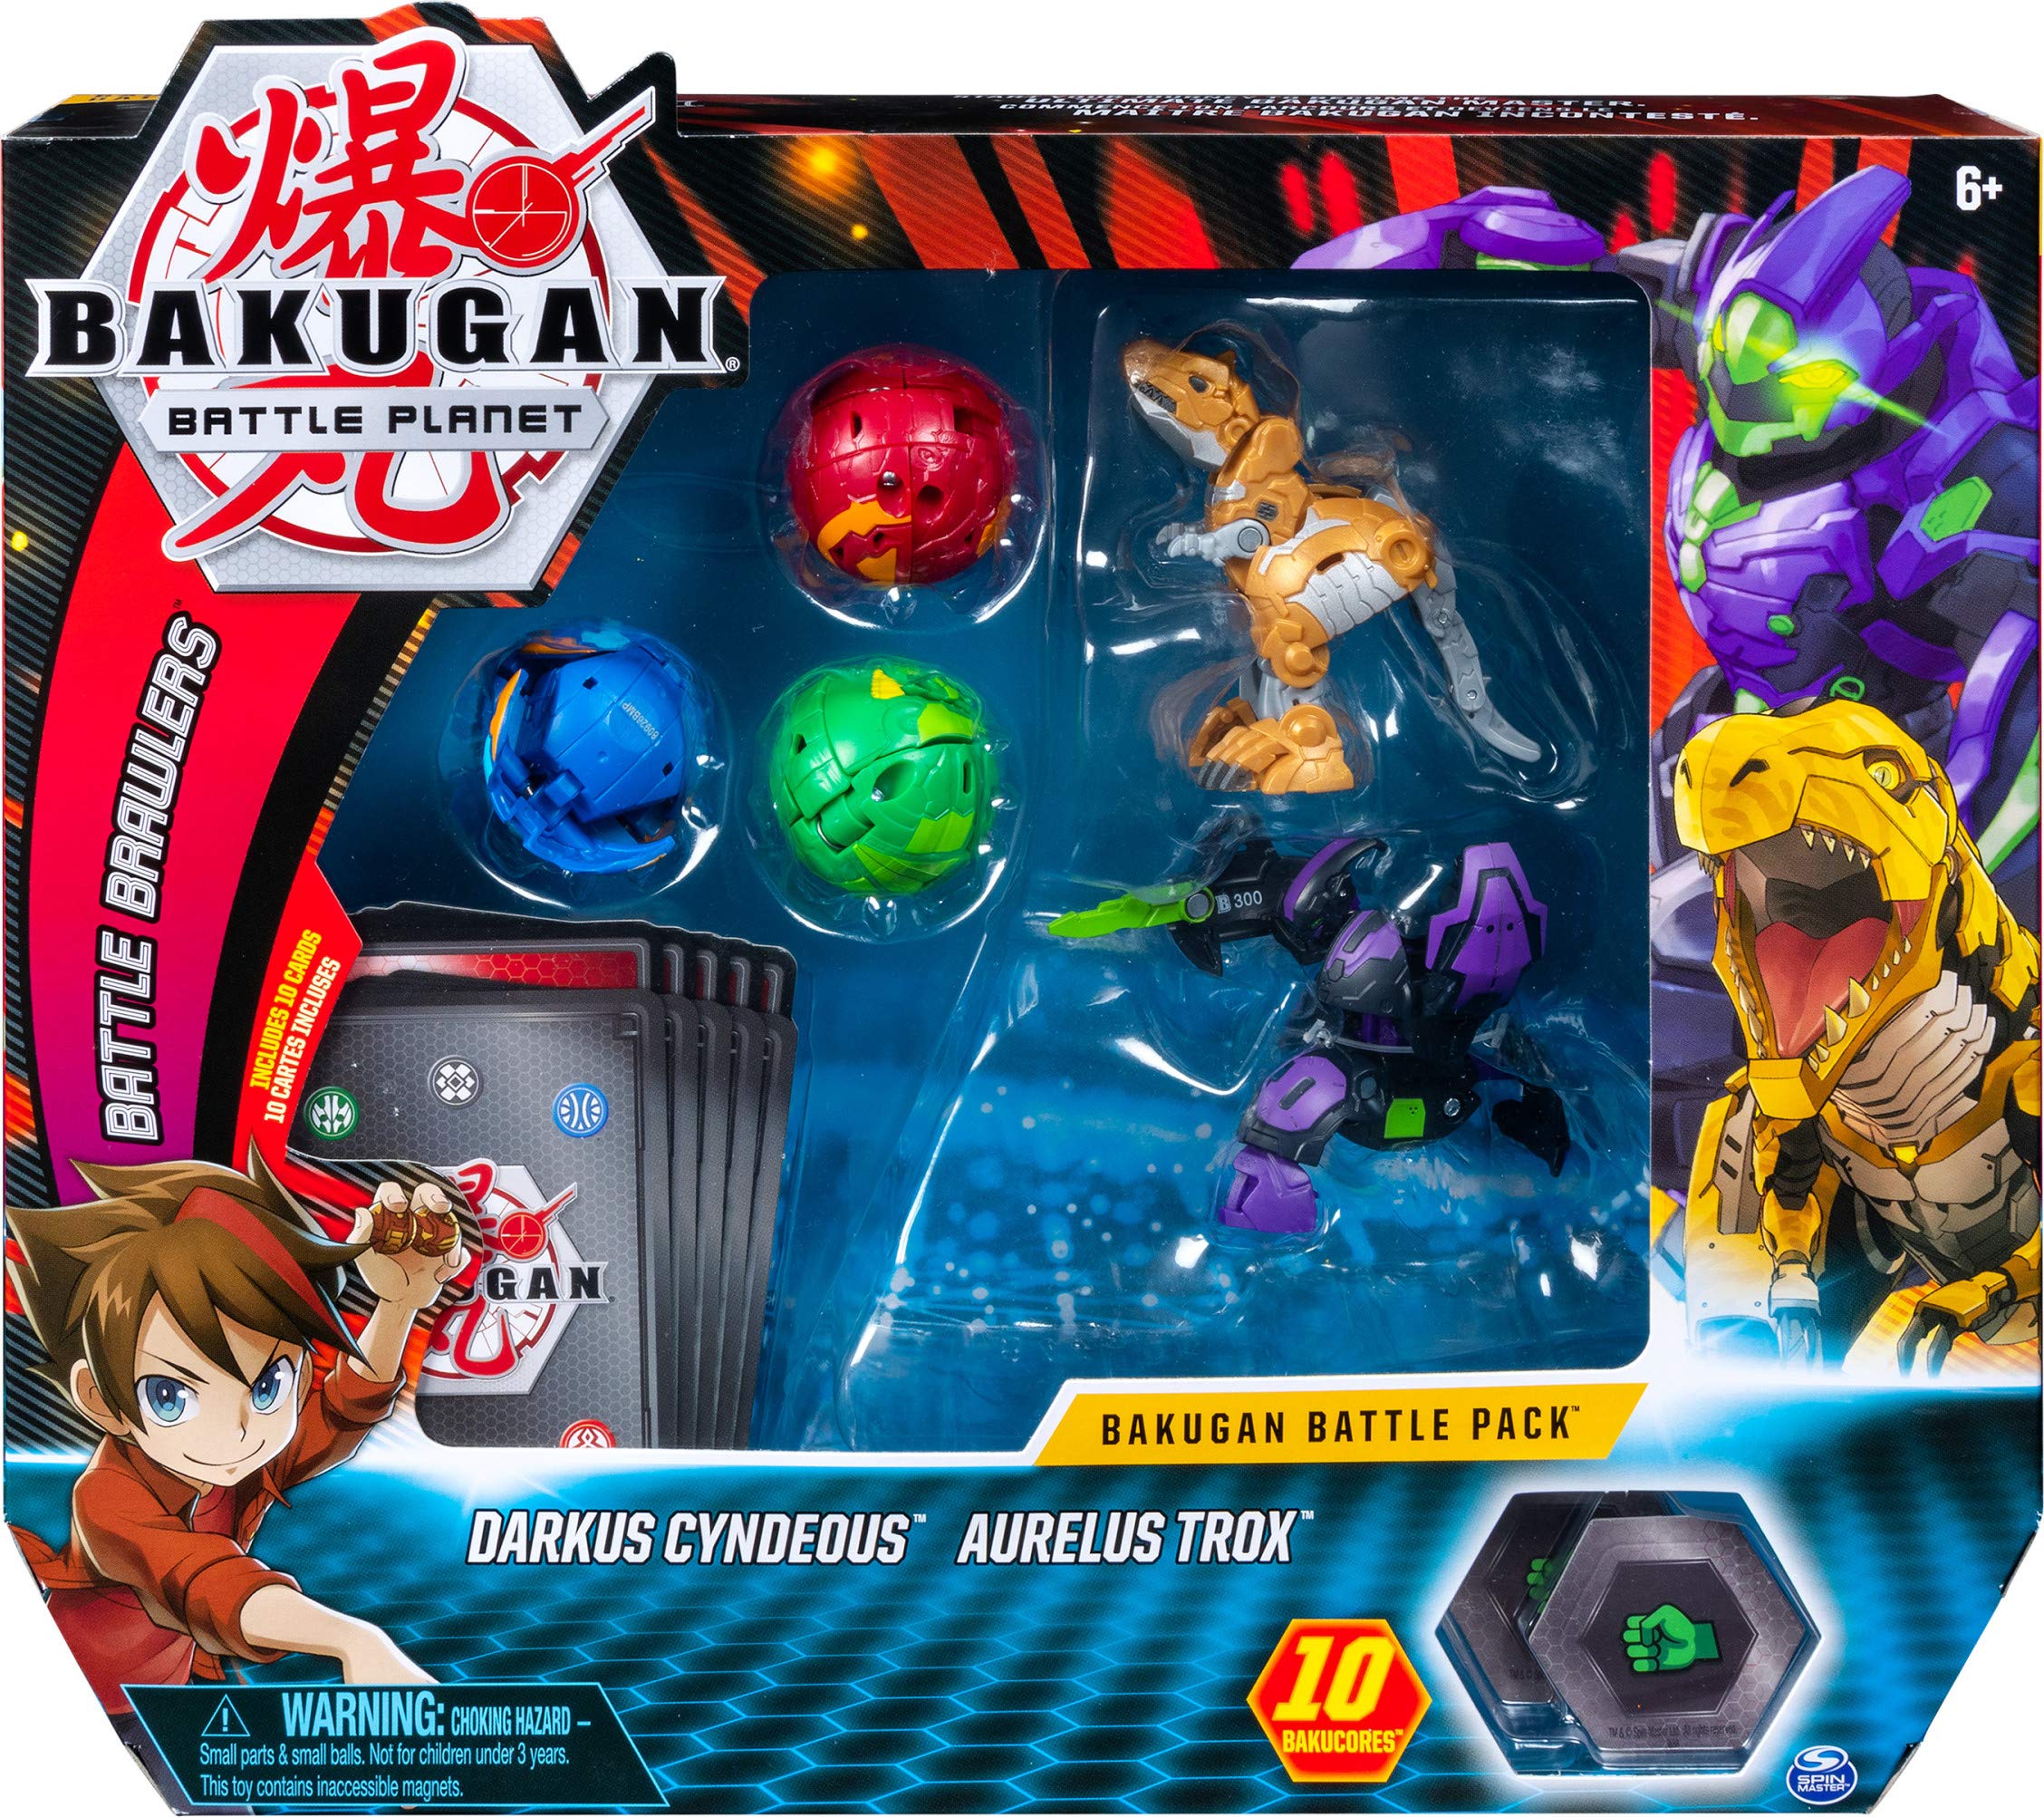 Bakugan, Battle Pack 5 Pack, Darkus Cyndeous & Aurelus Trox, Collectible Cards & Figures, for Ages 6 & Up